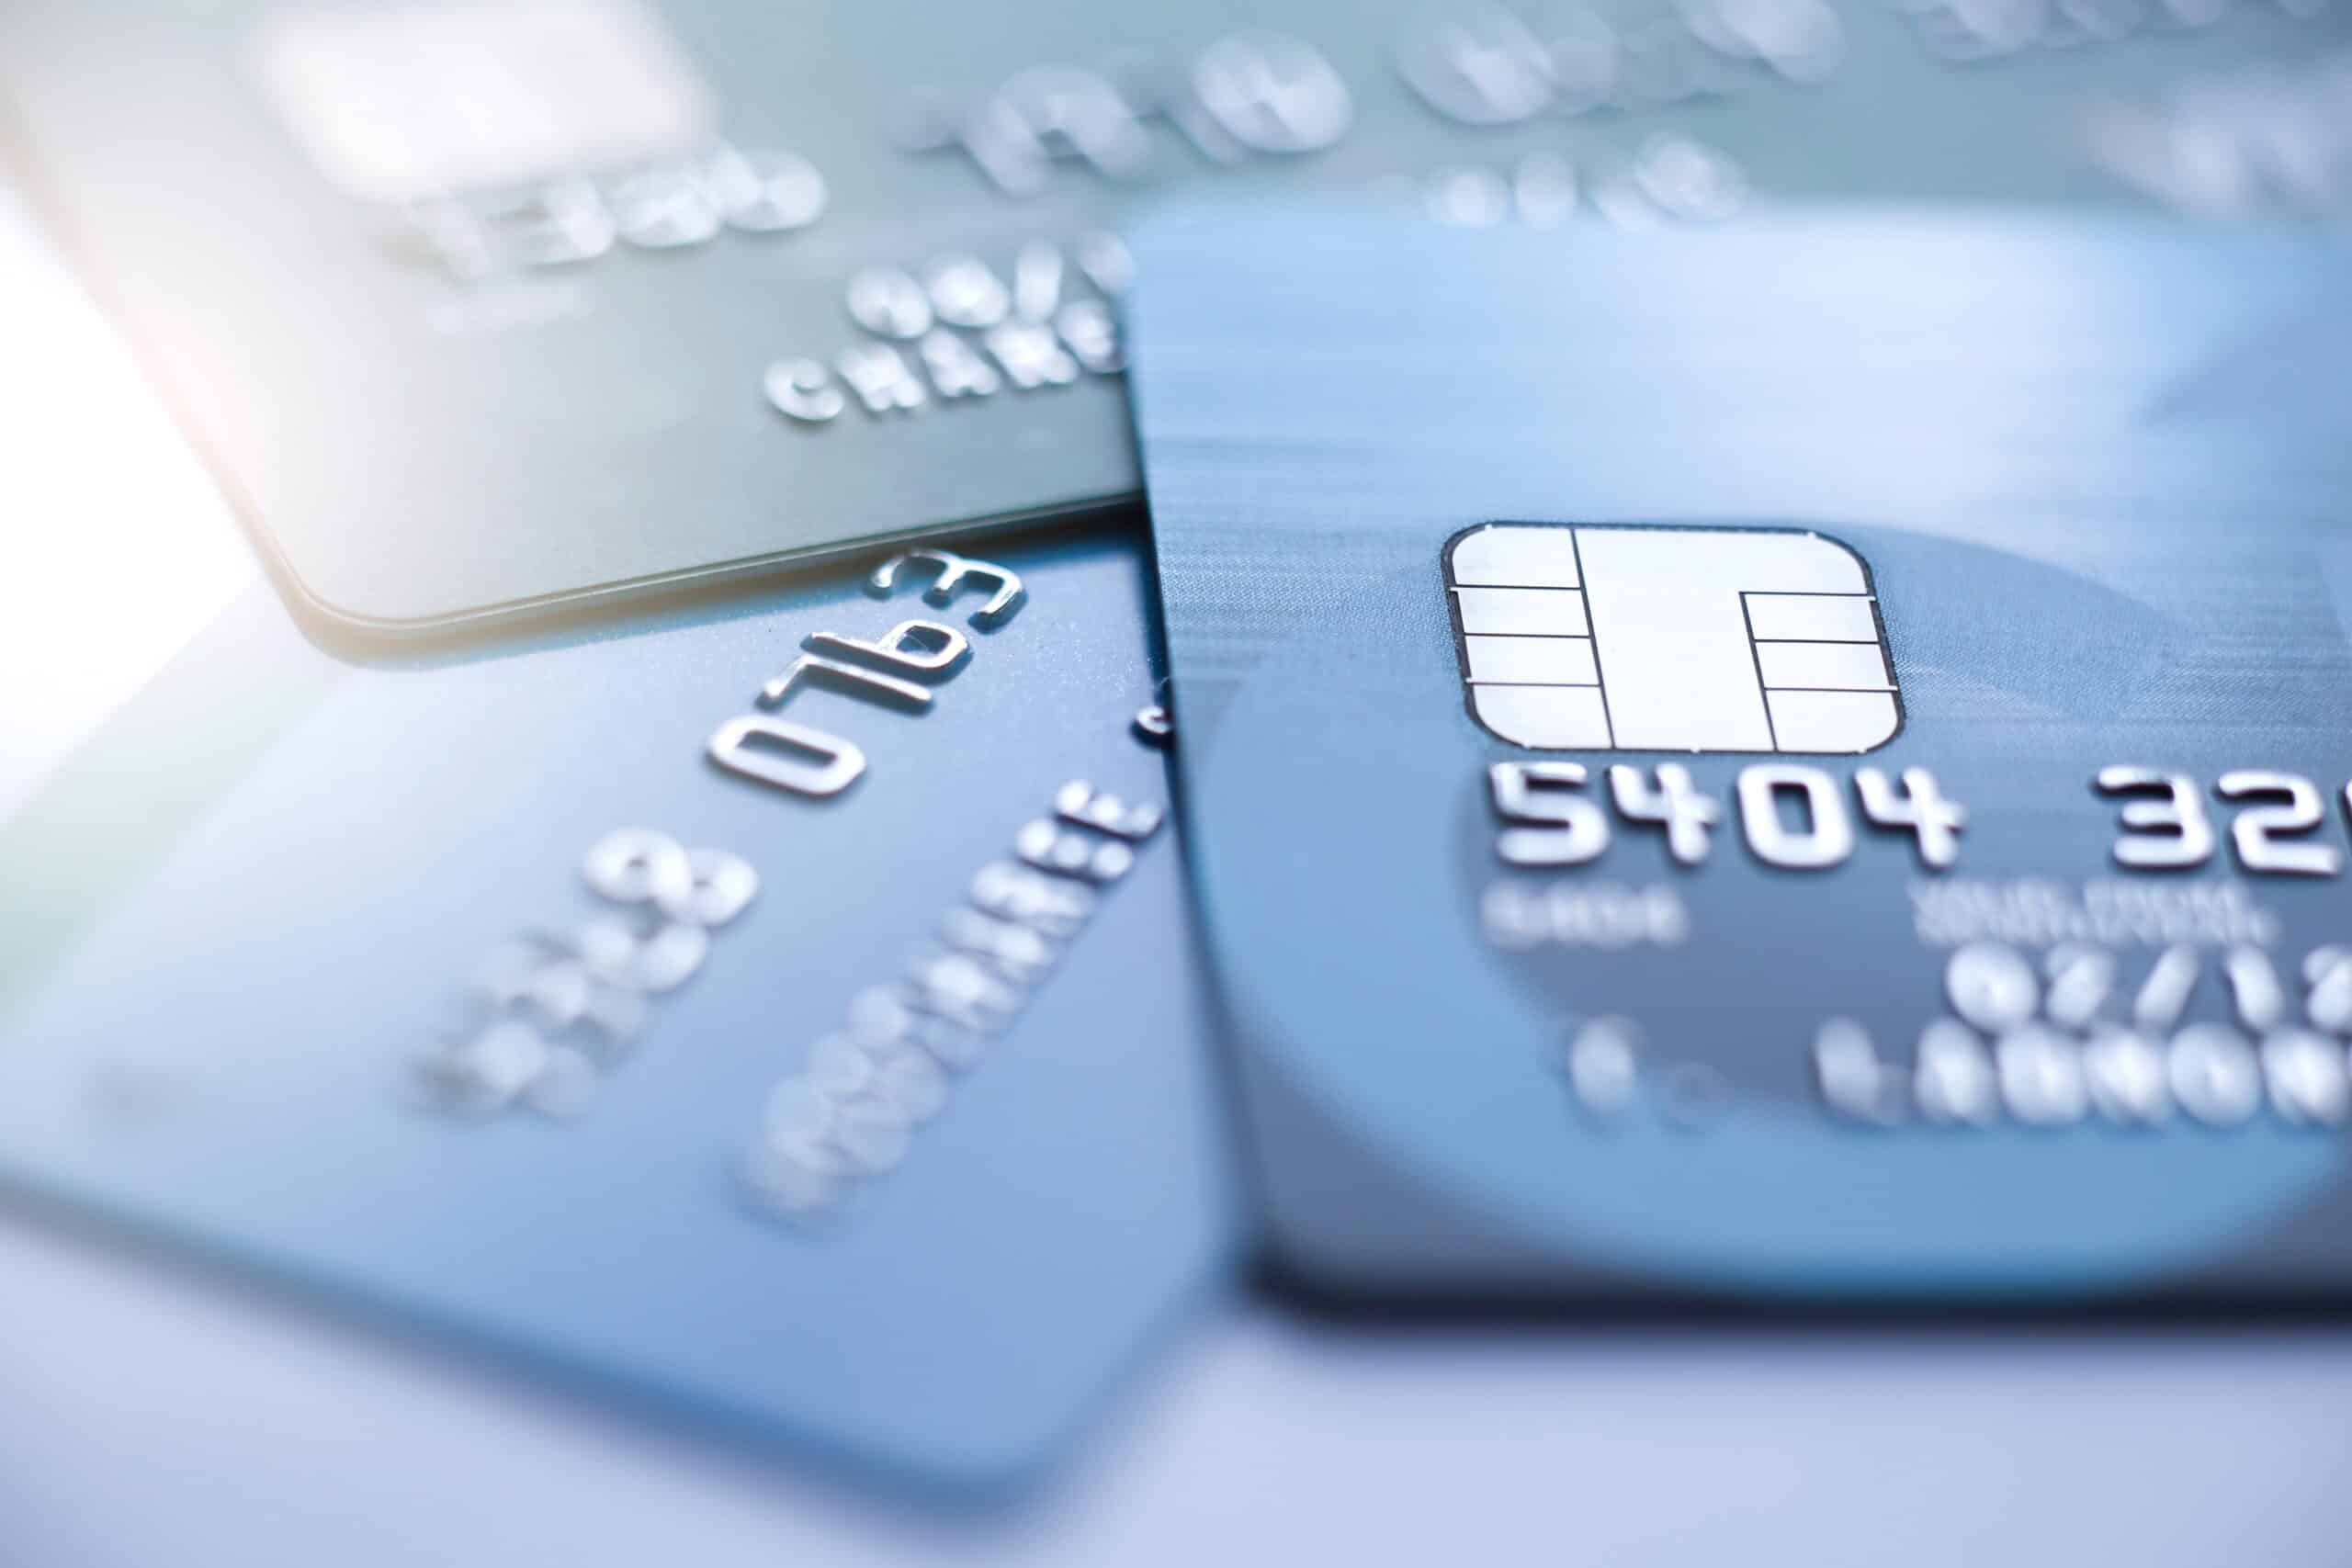 COVID-19 lockdowns inspire Australians to wipe off record levels of credit card debt in May – The New Daily